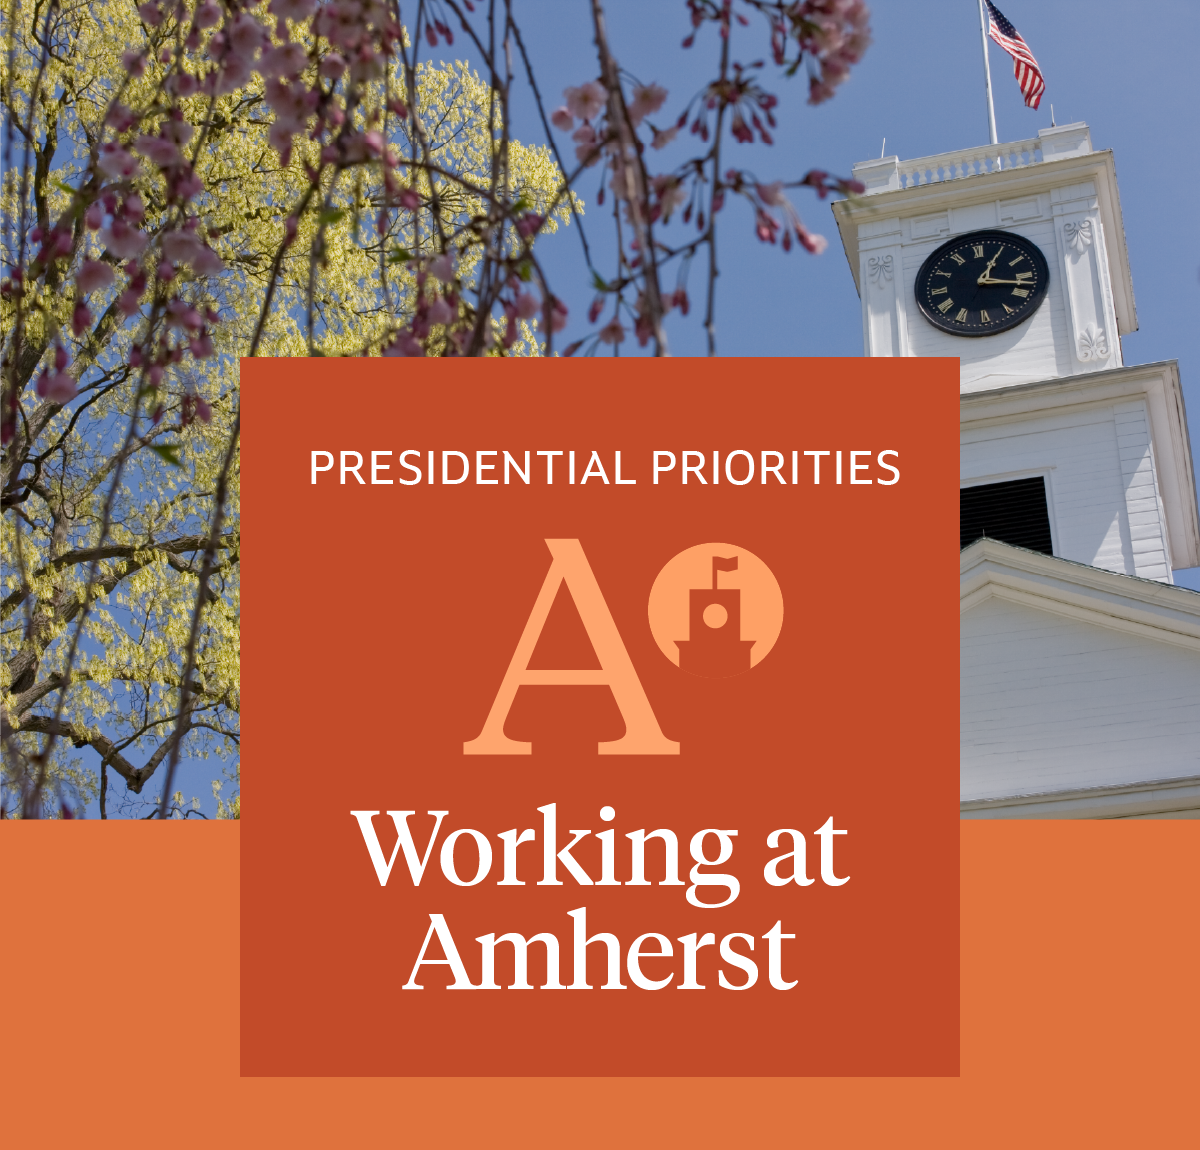 Johnson Chapel clock tower in springtime, with logo for Presidential Priorities: Working at Amherst